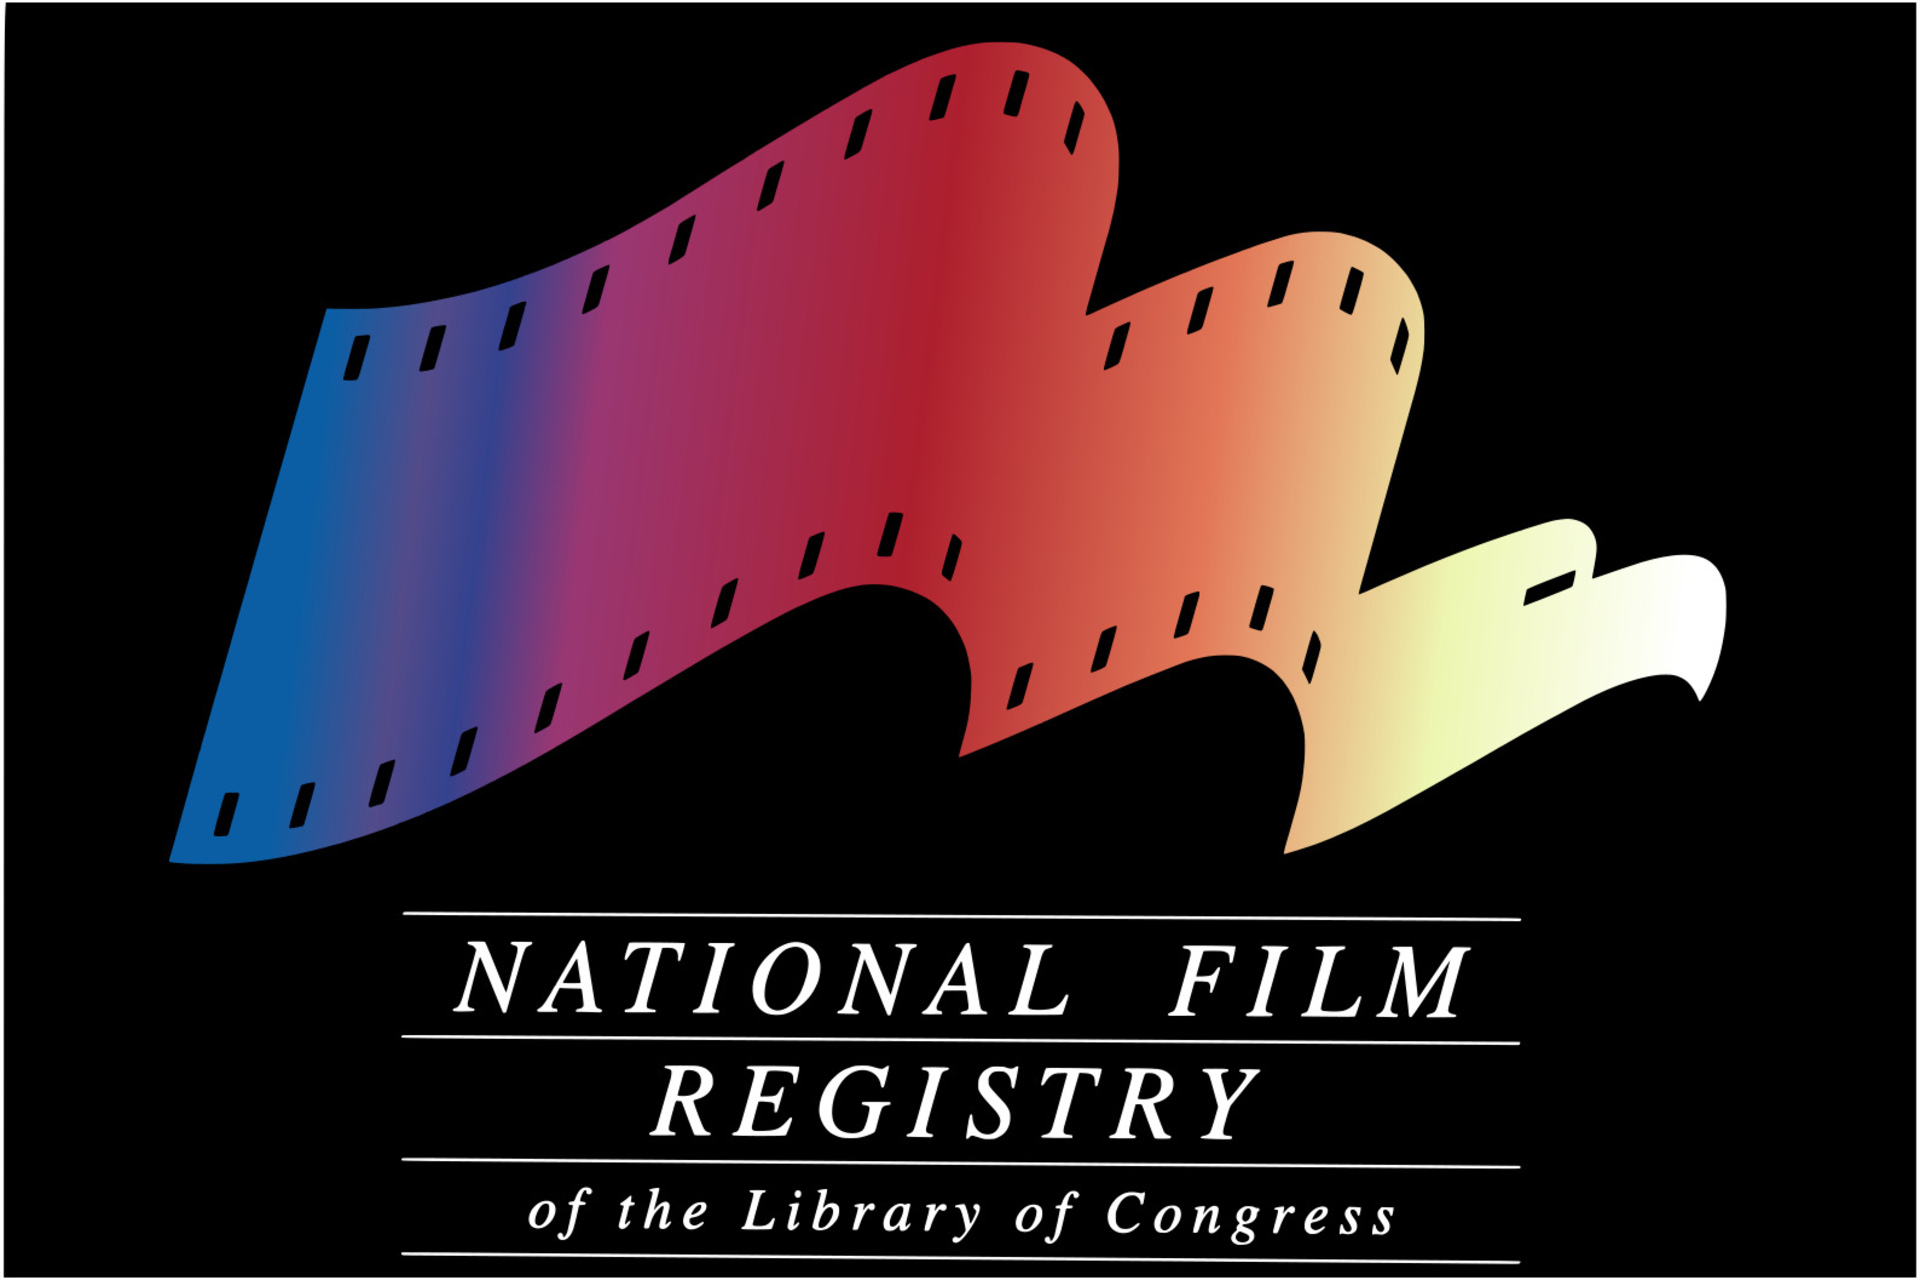 Christopher Nolan: the recognition of the United States Library of Congress